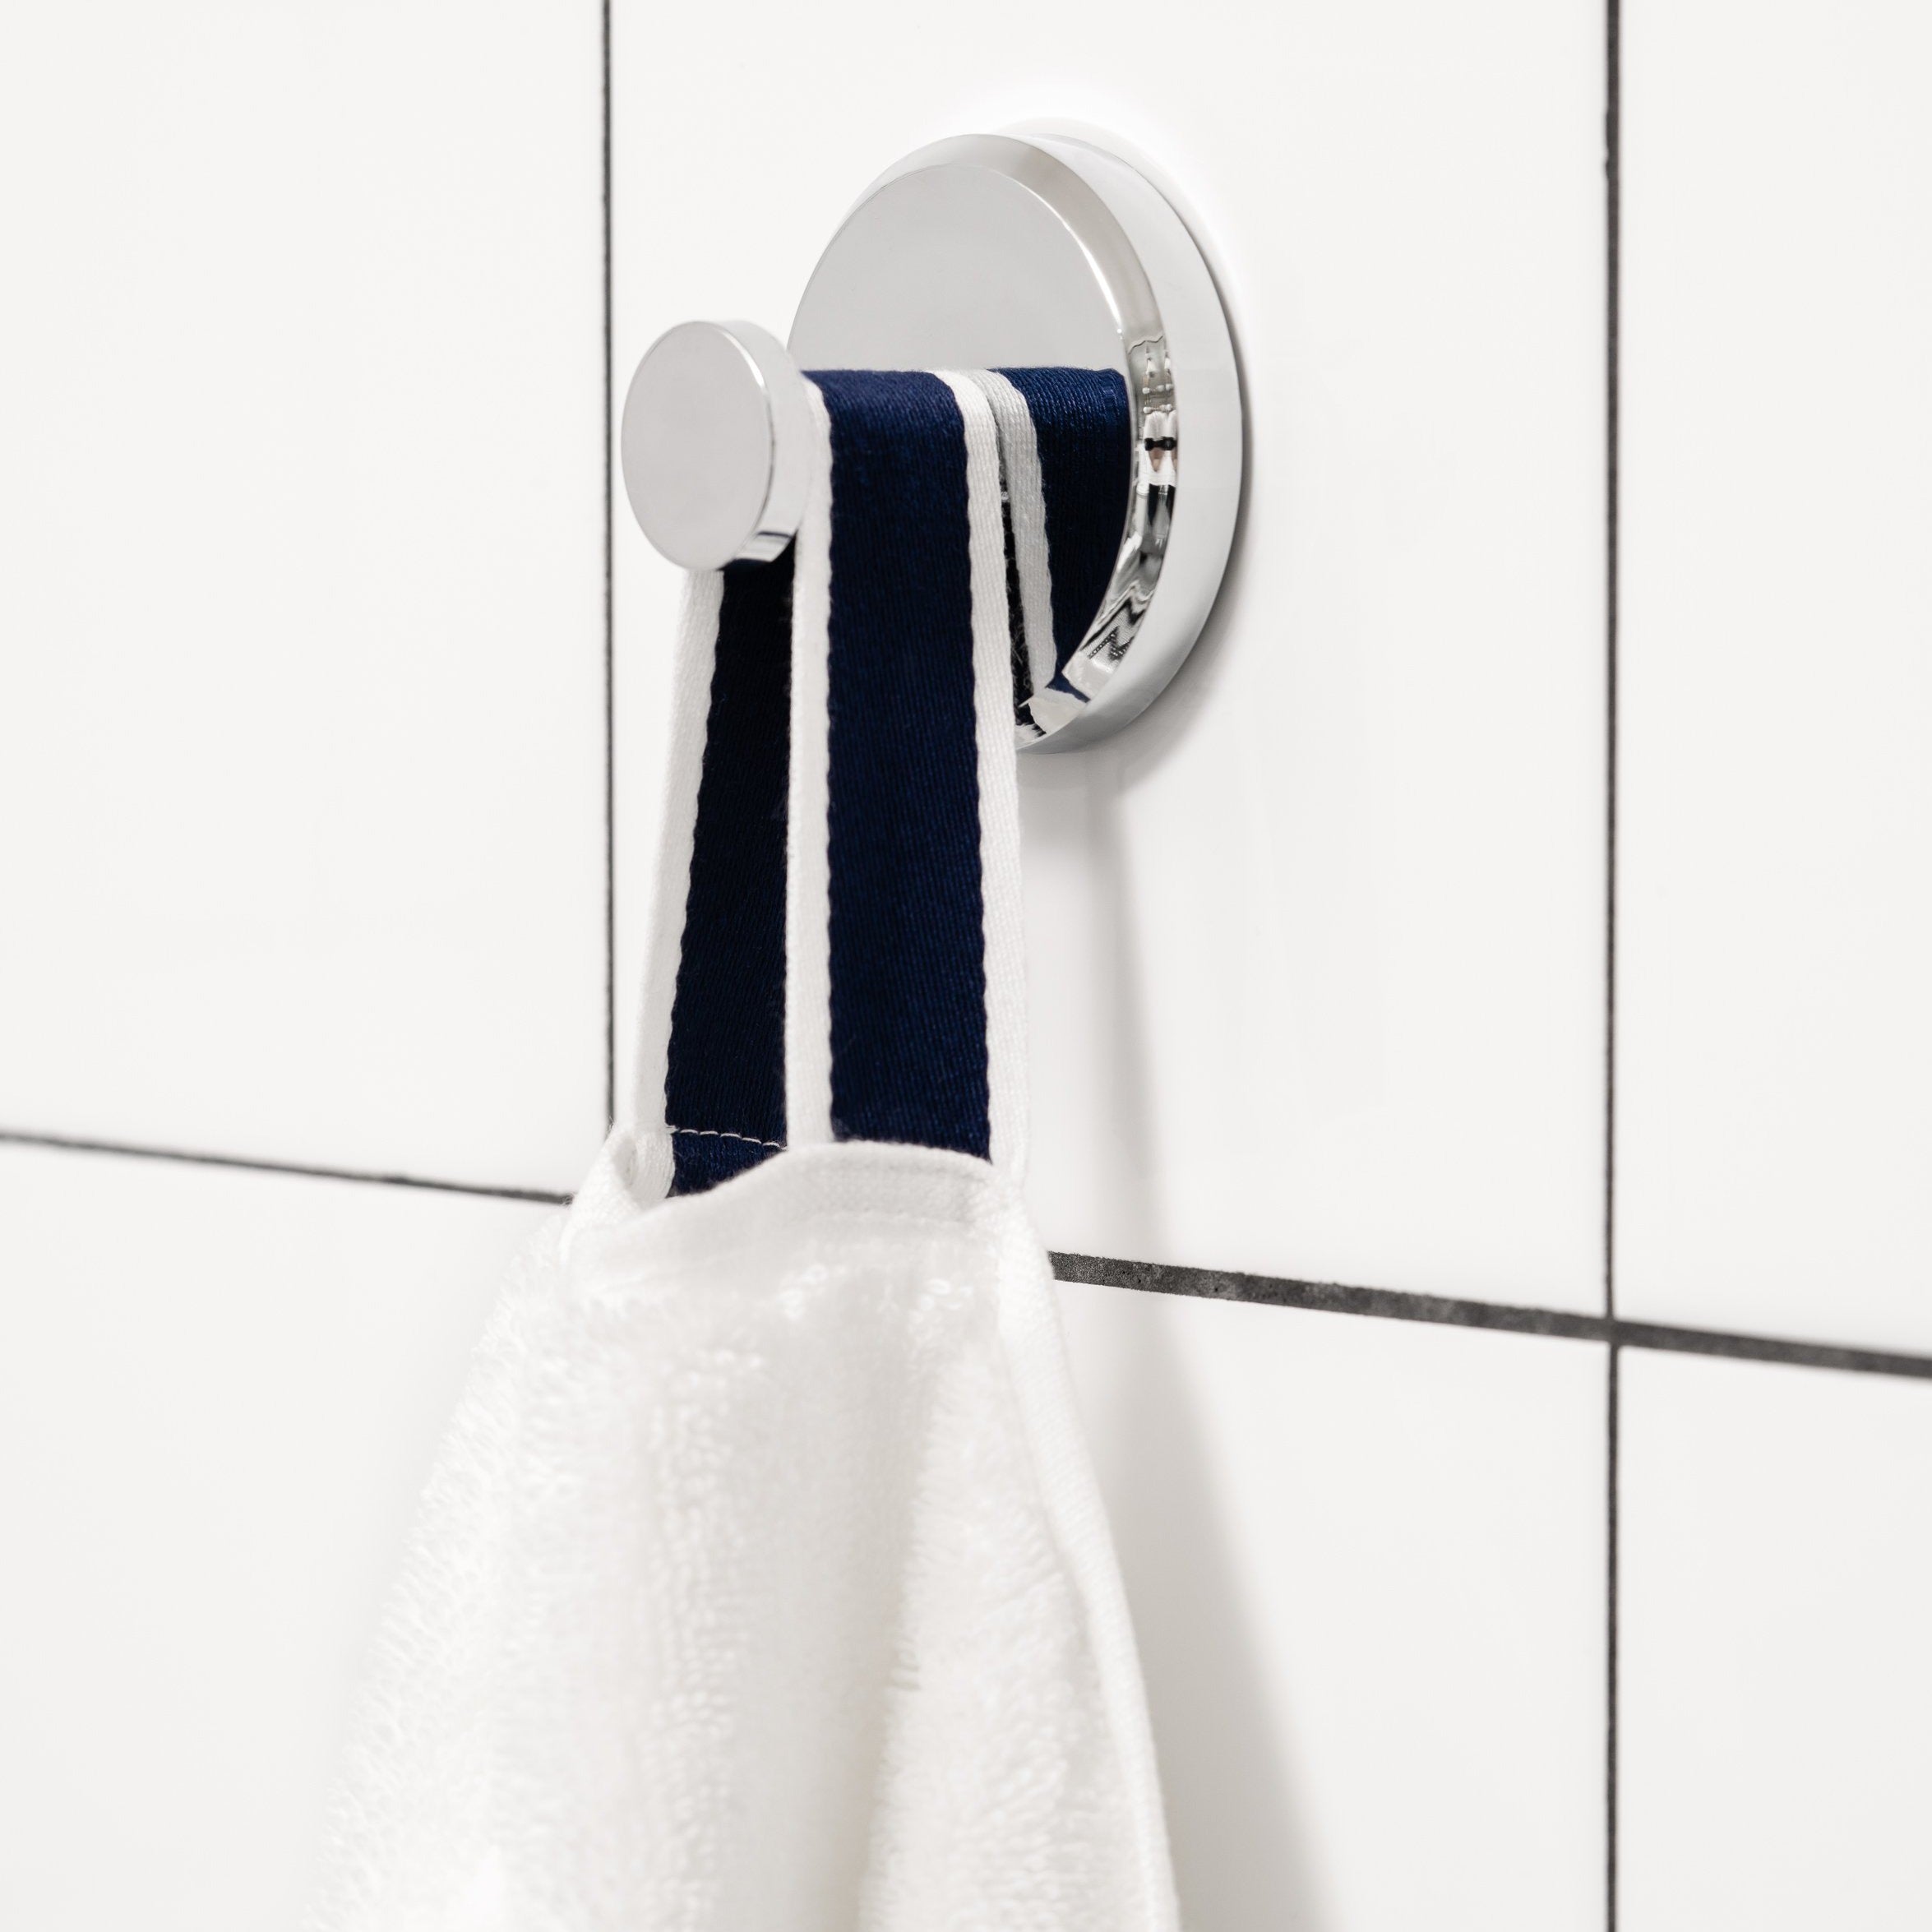 Havly | Havly | The Mini Classic Hand Towel Set in Academy Navy